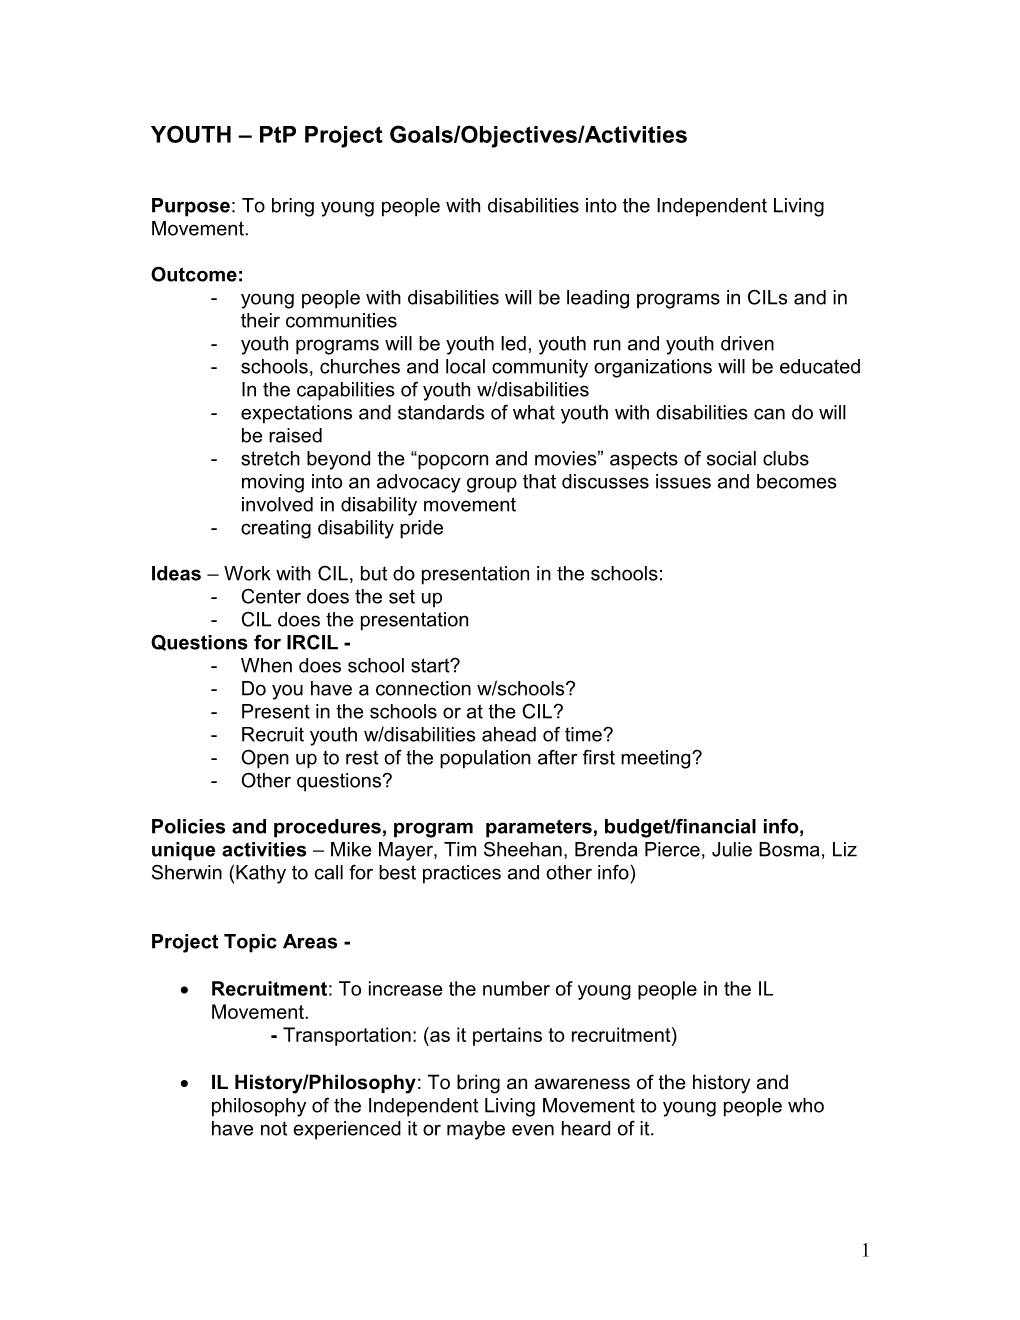 YOUTH Ptp Project Goals/Objectives/Activities